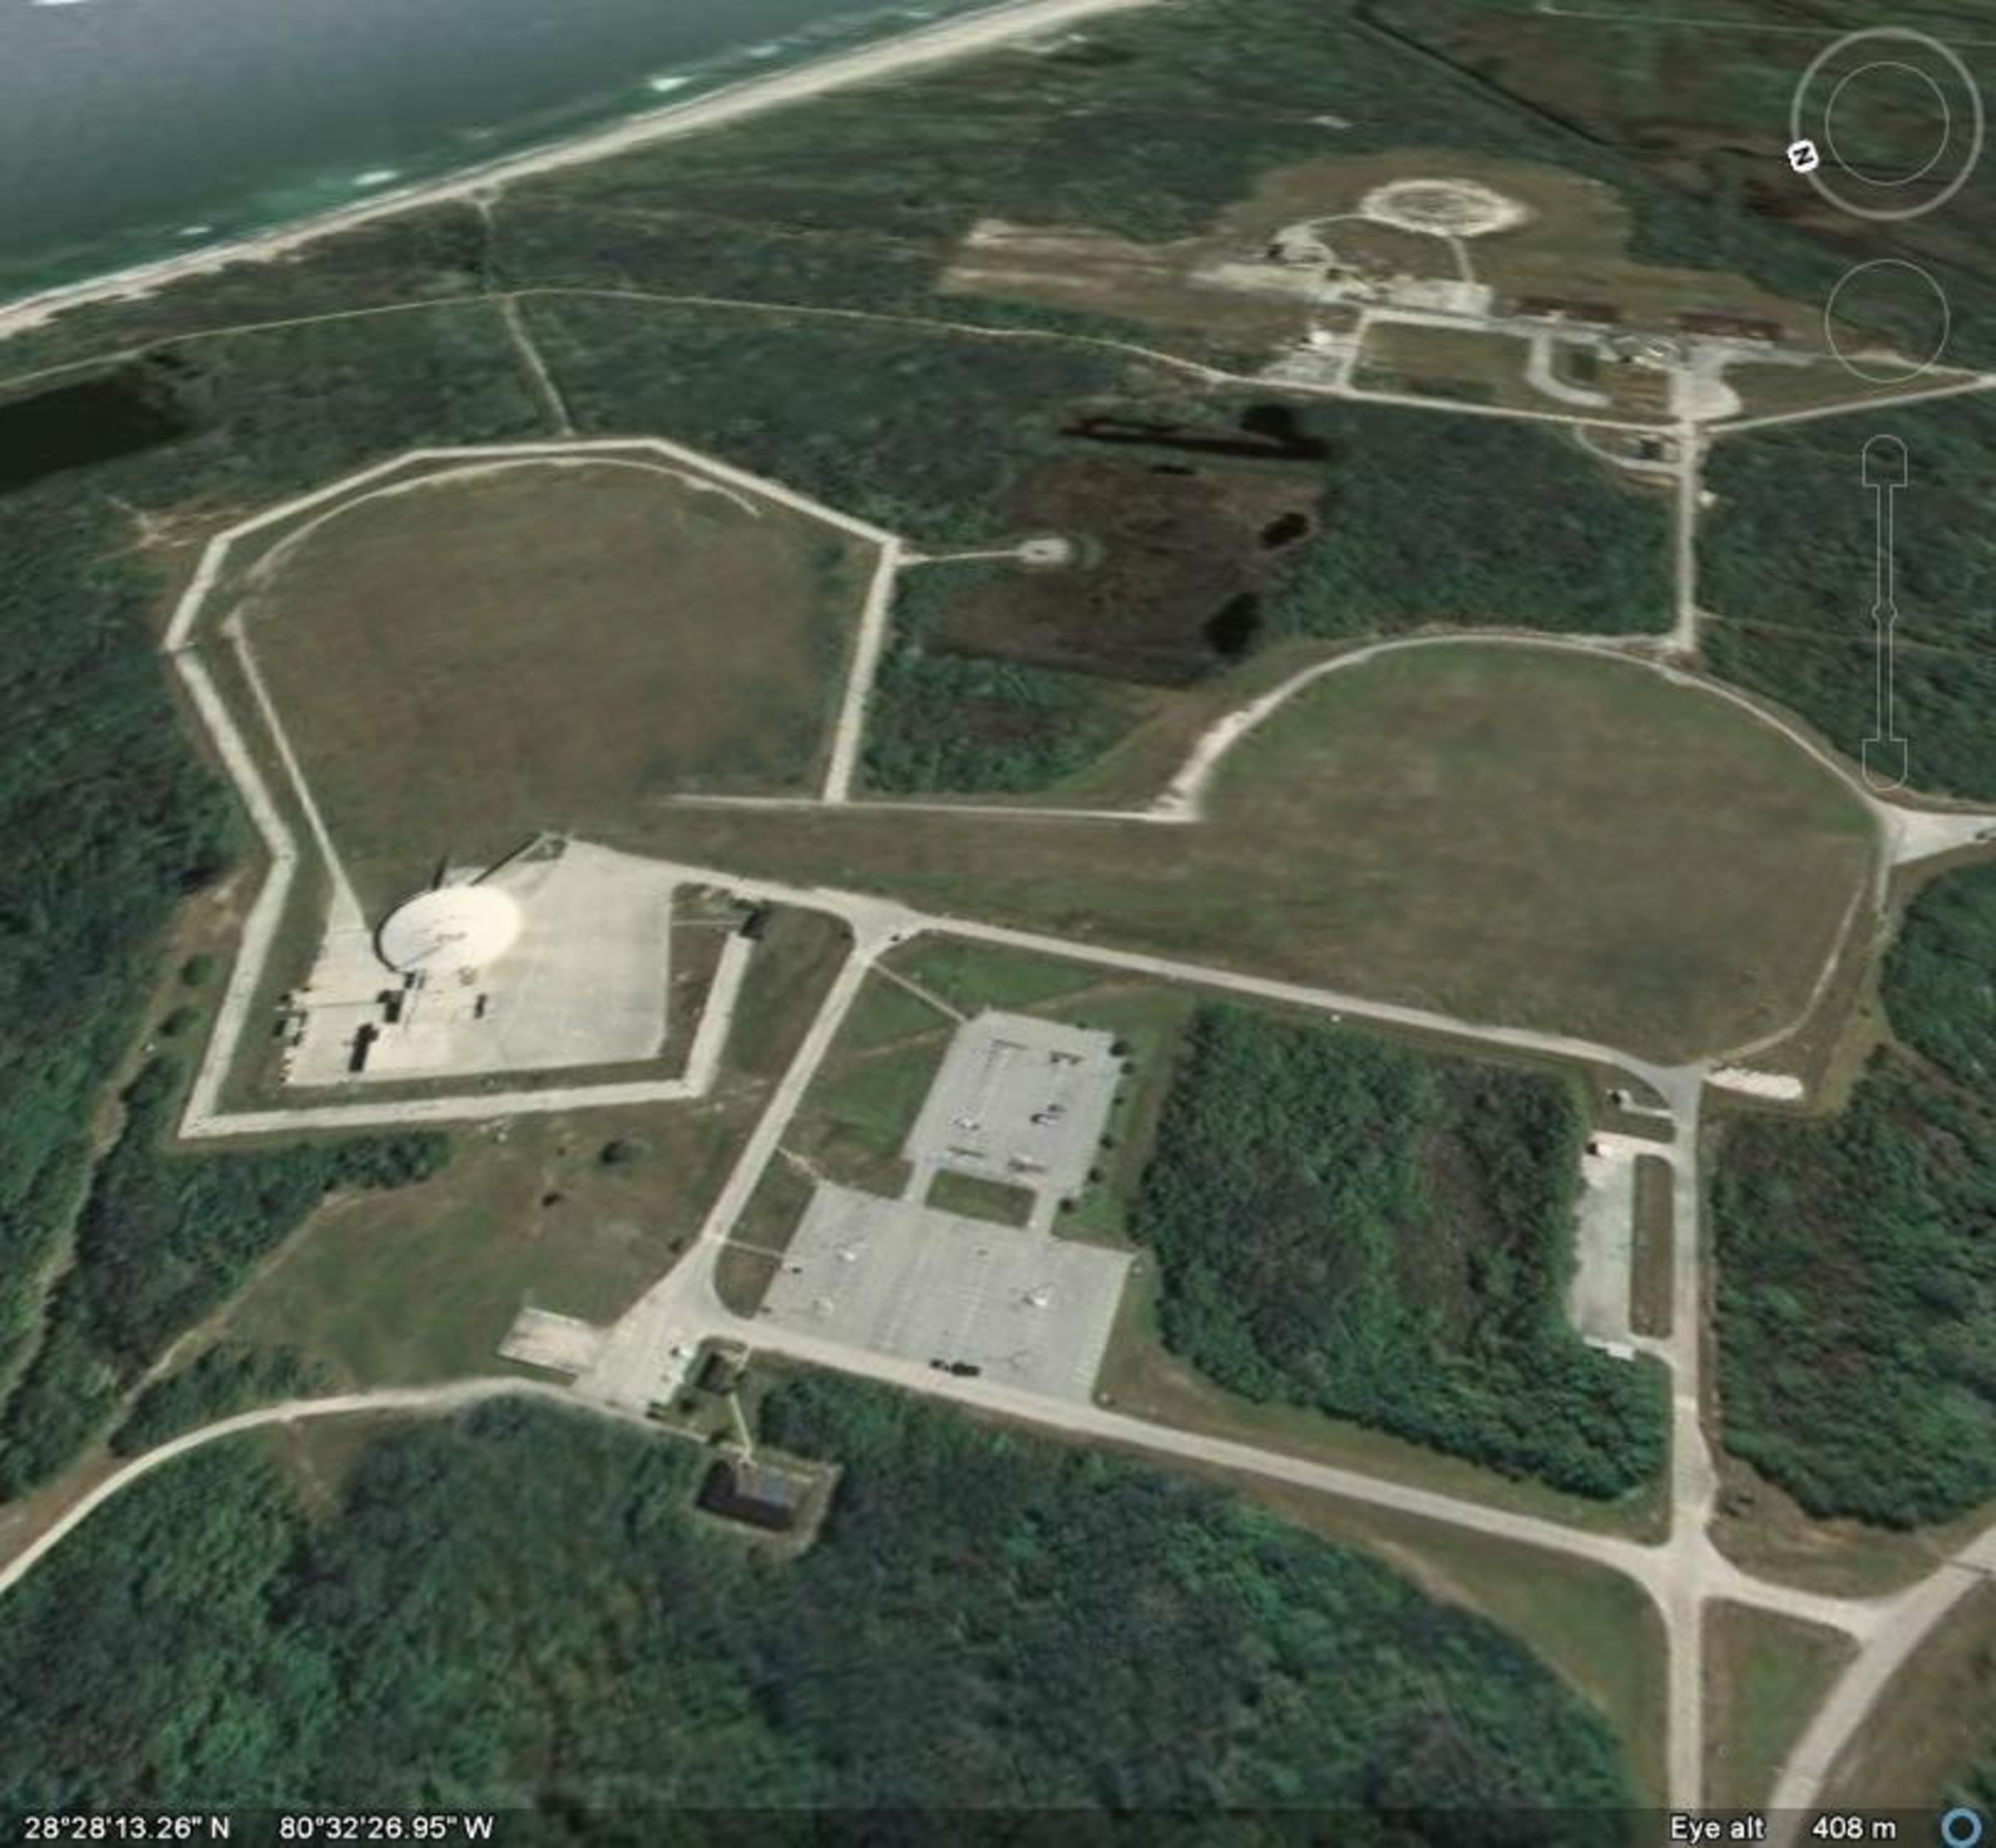 Space Launch Complex 36 at Cape Canaveral in Florida launched the first U.S. government exploration missions to the Moon, and will now be the home of Moon Express lunar lander development and test operations.